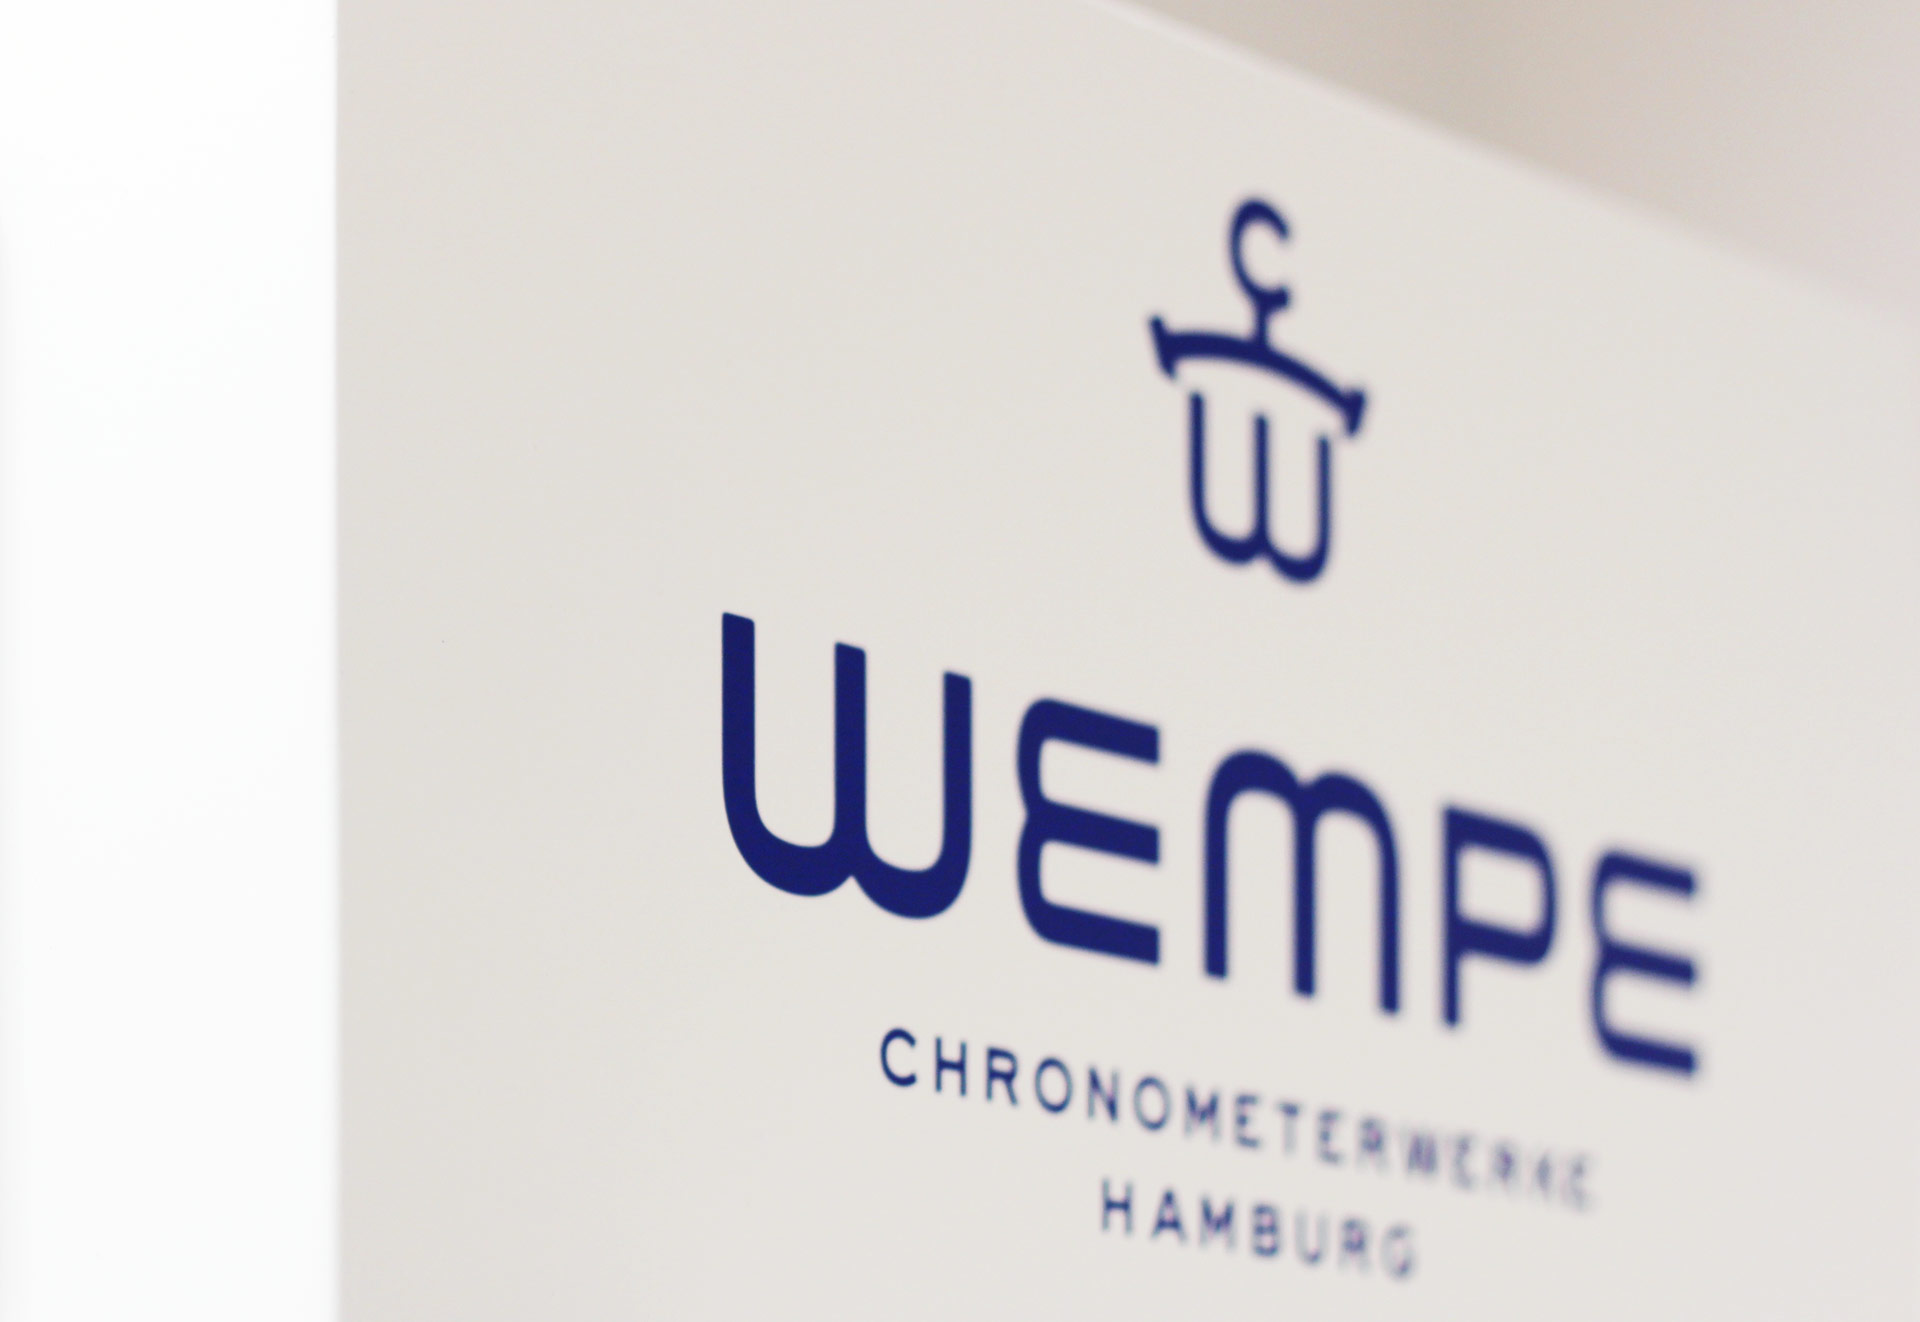 WEMPE is a traditional German Manufacturer of Marine Instruments: Still based in Hamburg.